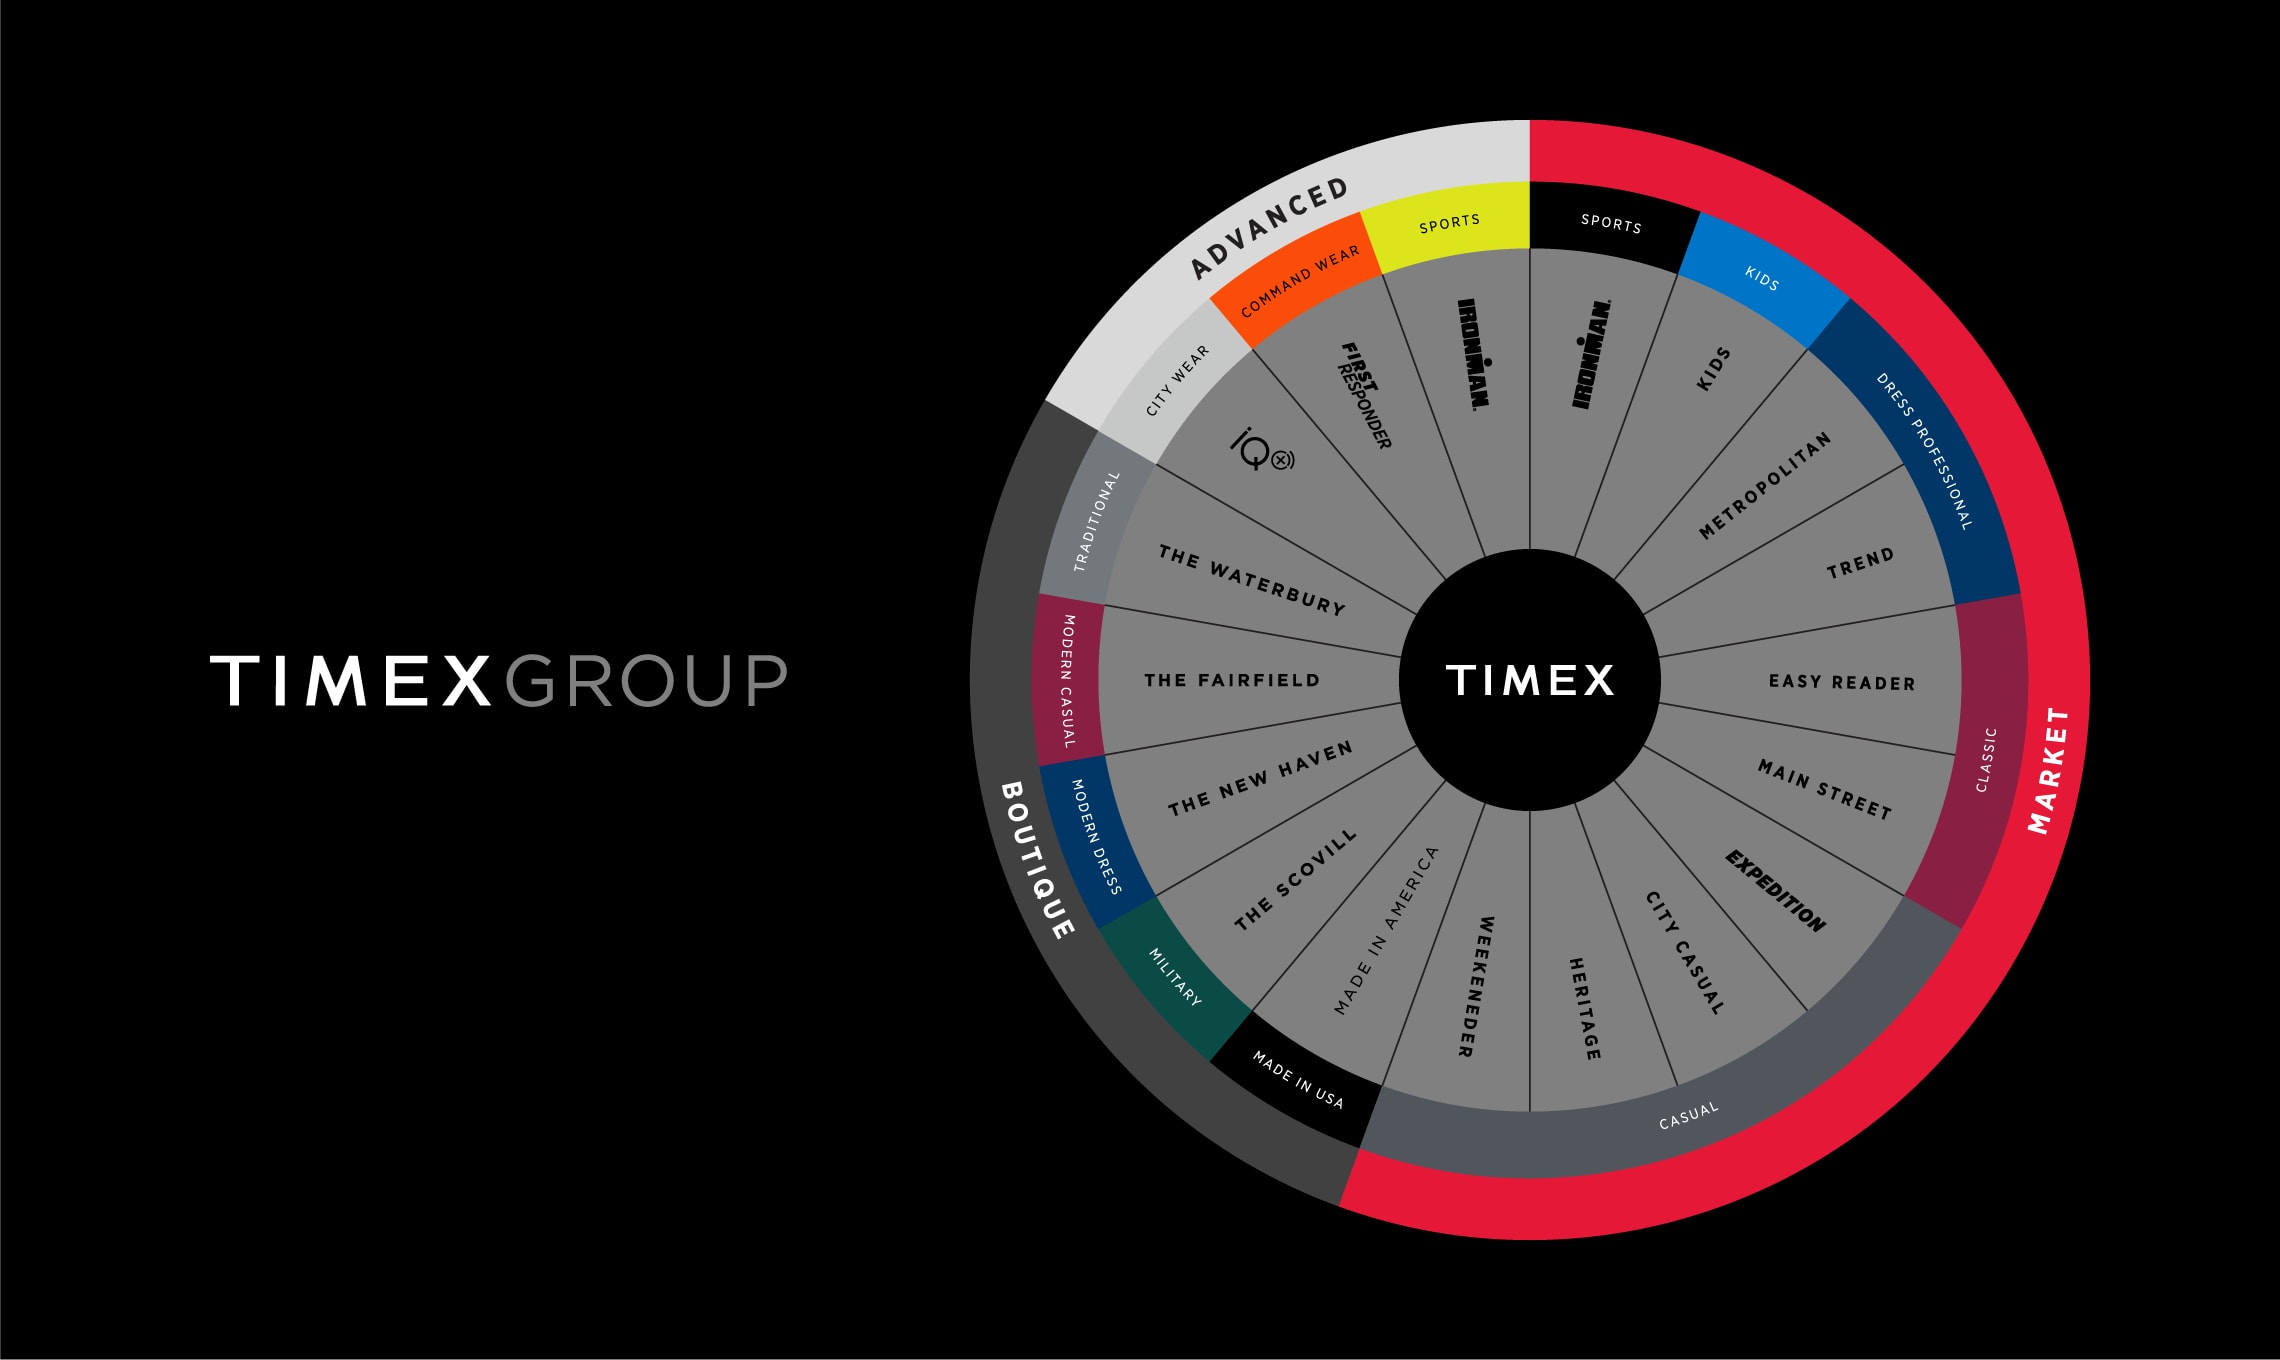 Timex Group - brand architecture.